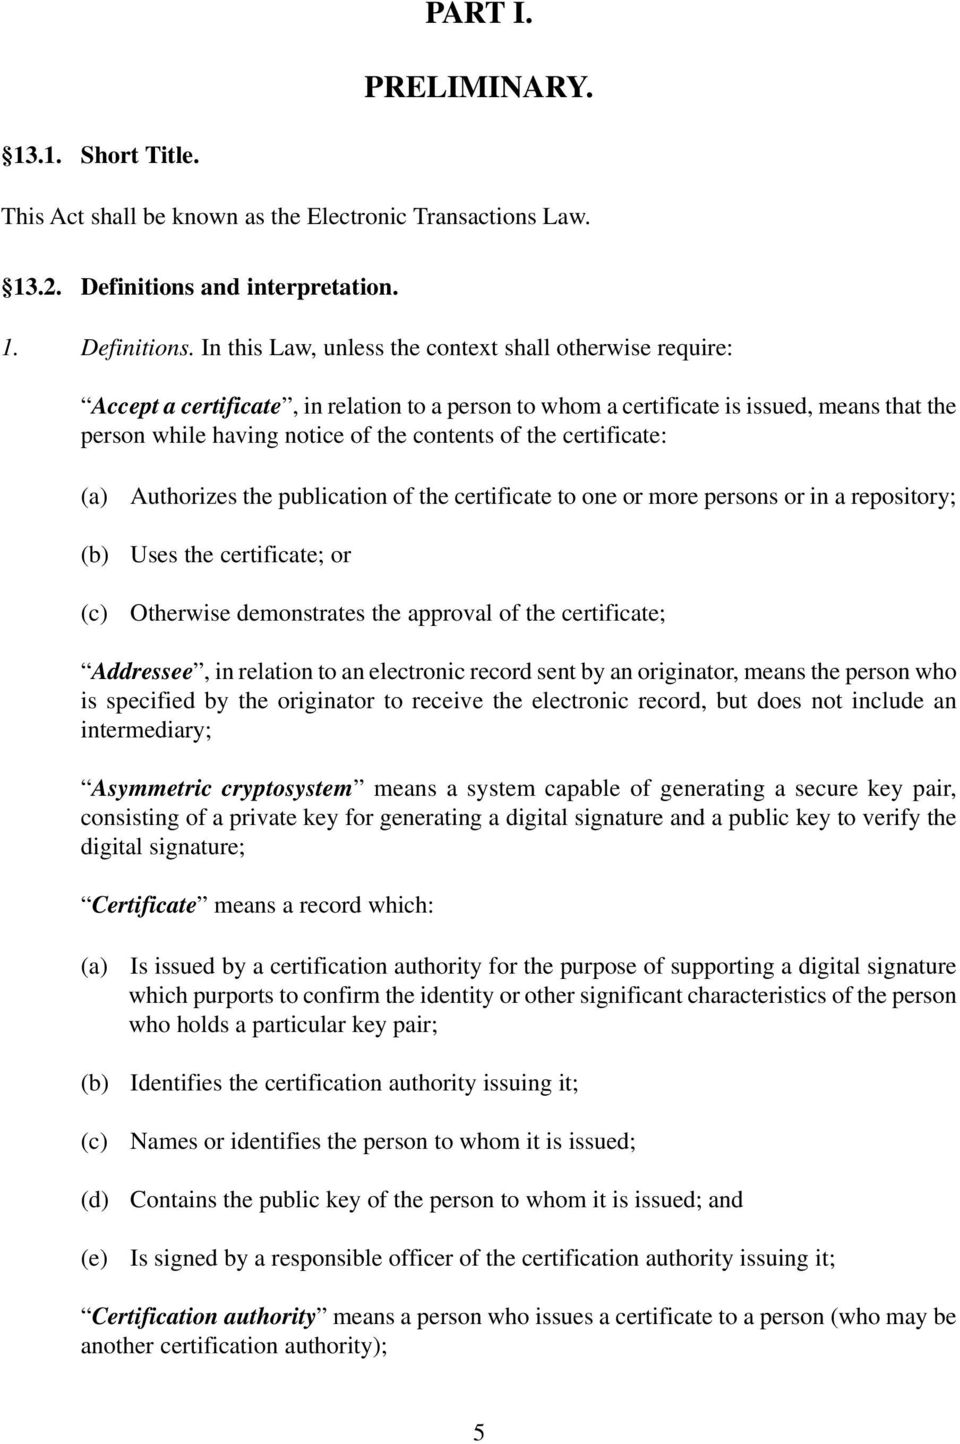 In this Law, unless the context shall otherwise require: Accept a certificate, in relation to a person to whom a certificate is issued, means that the person while having notice of the contents of